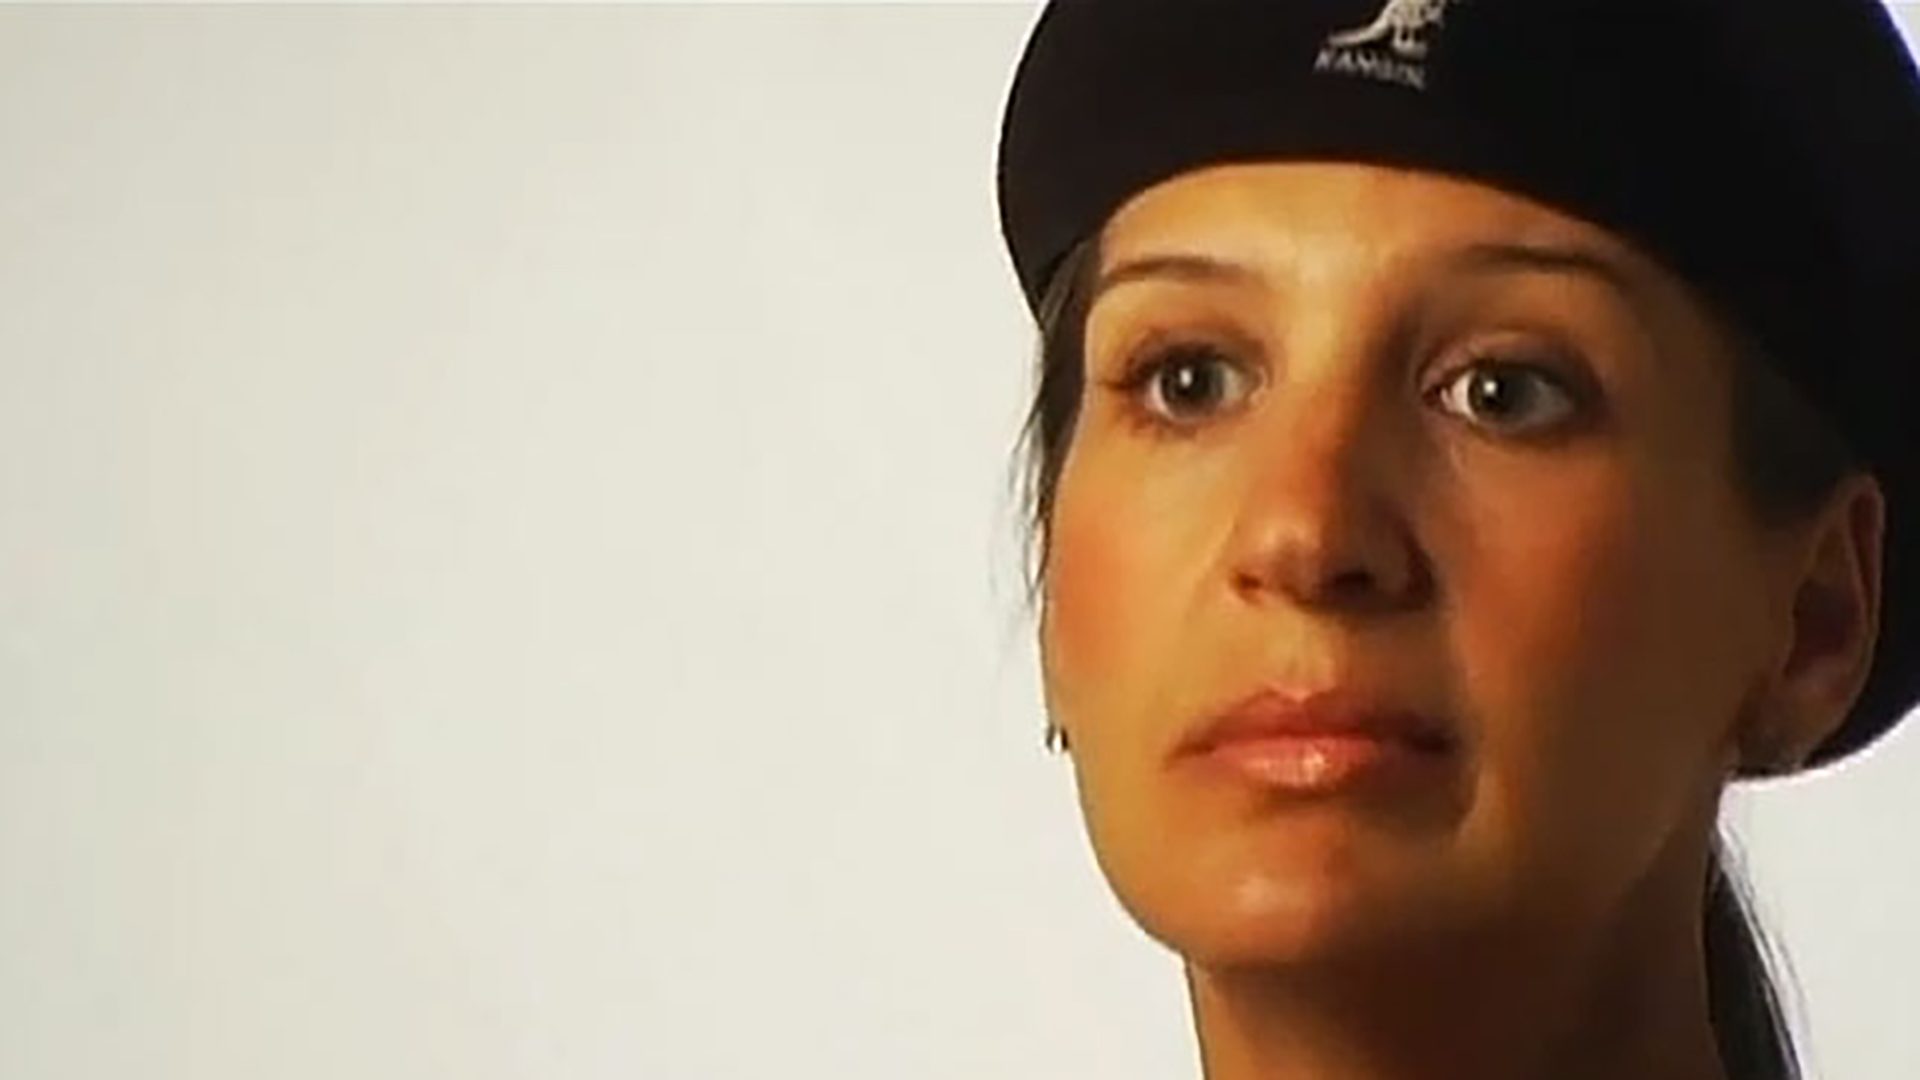 A close-up of a young woman wearing a black beret being interviewed against a white background